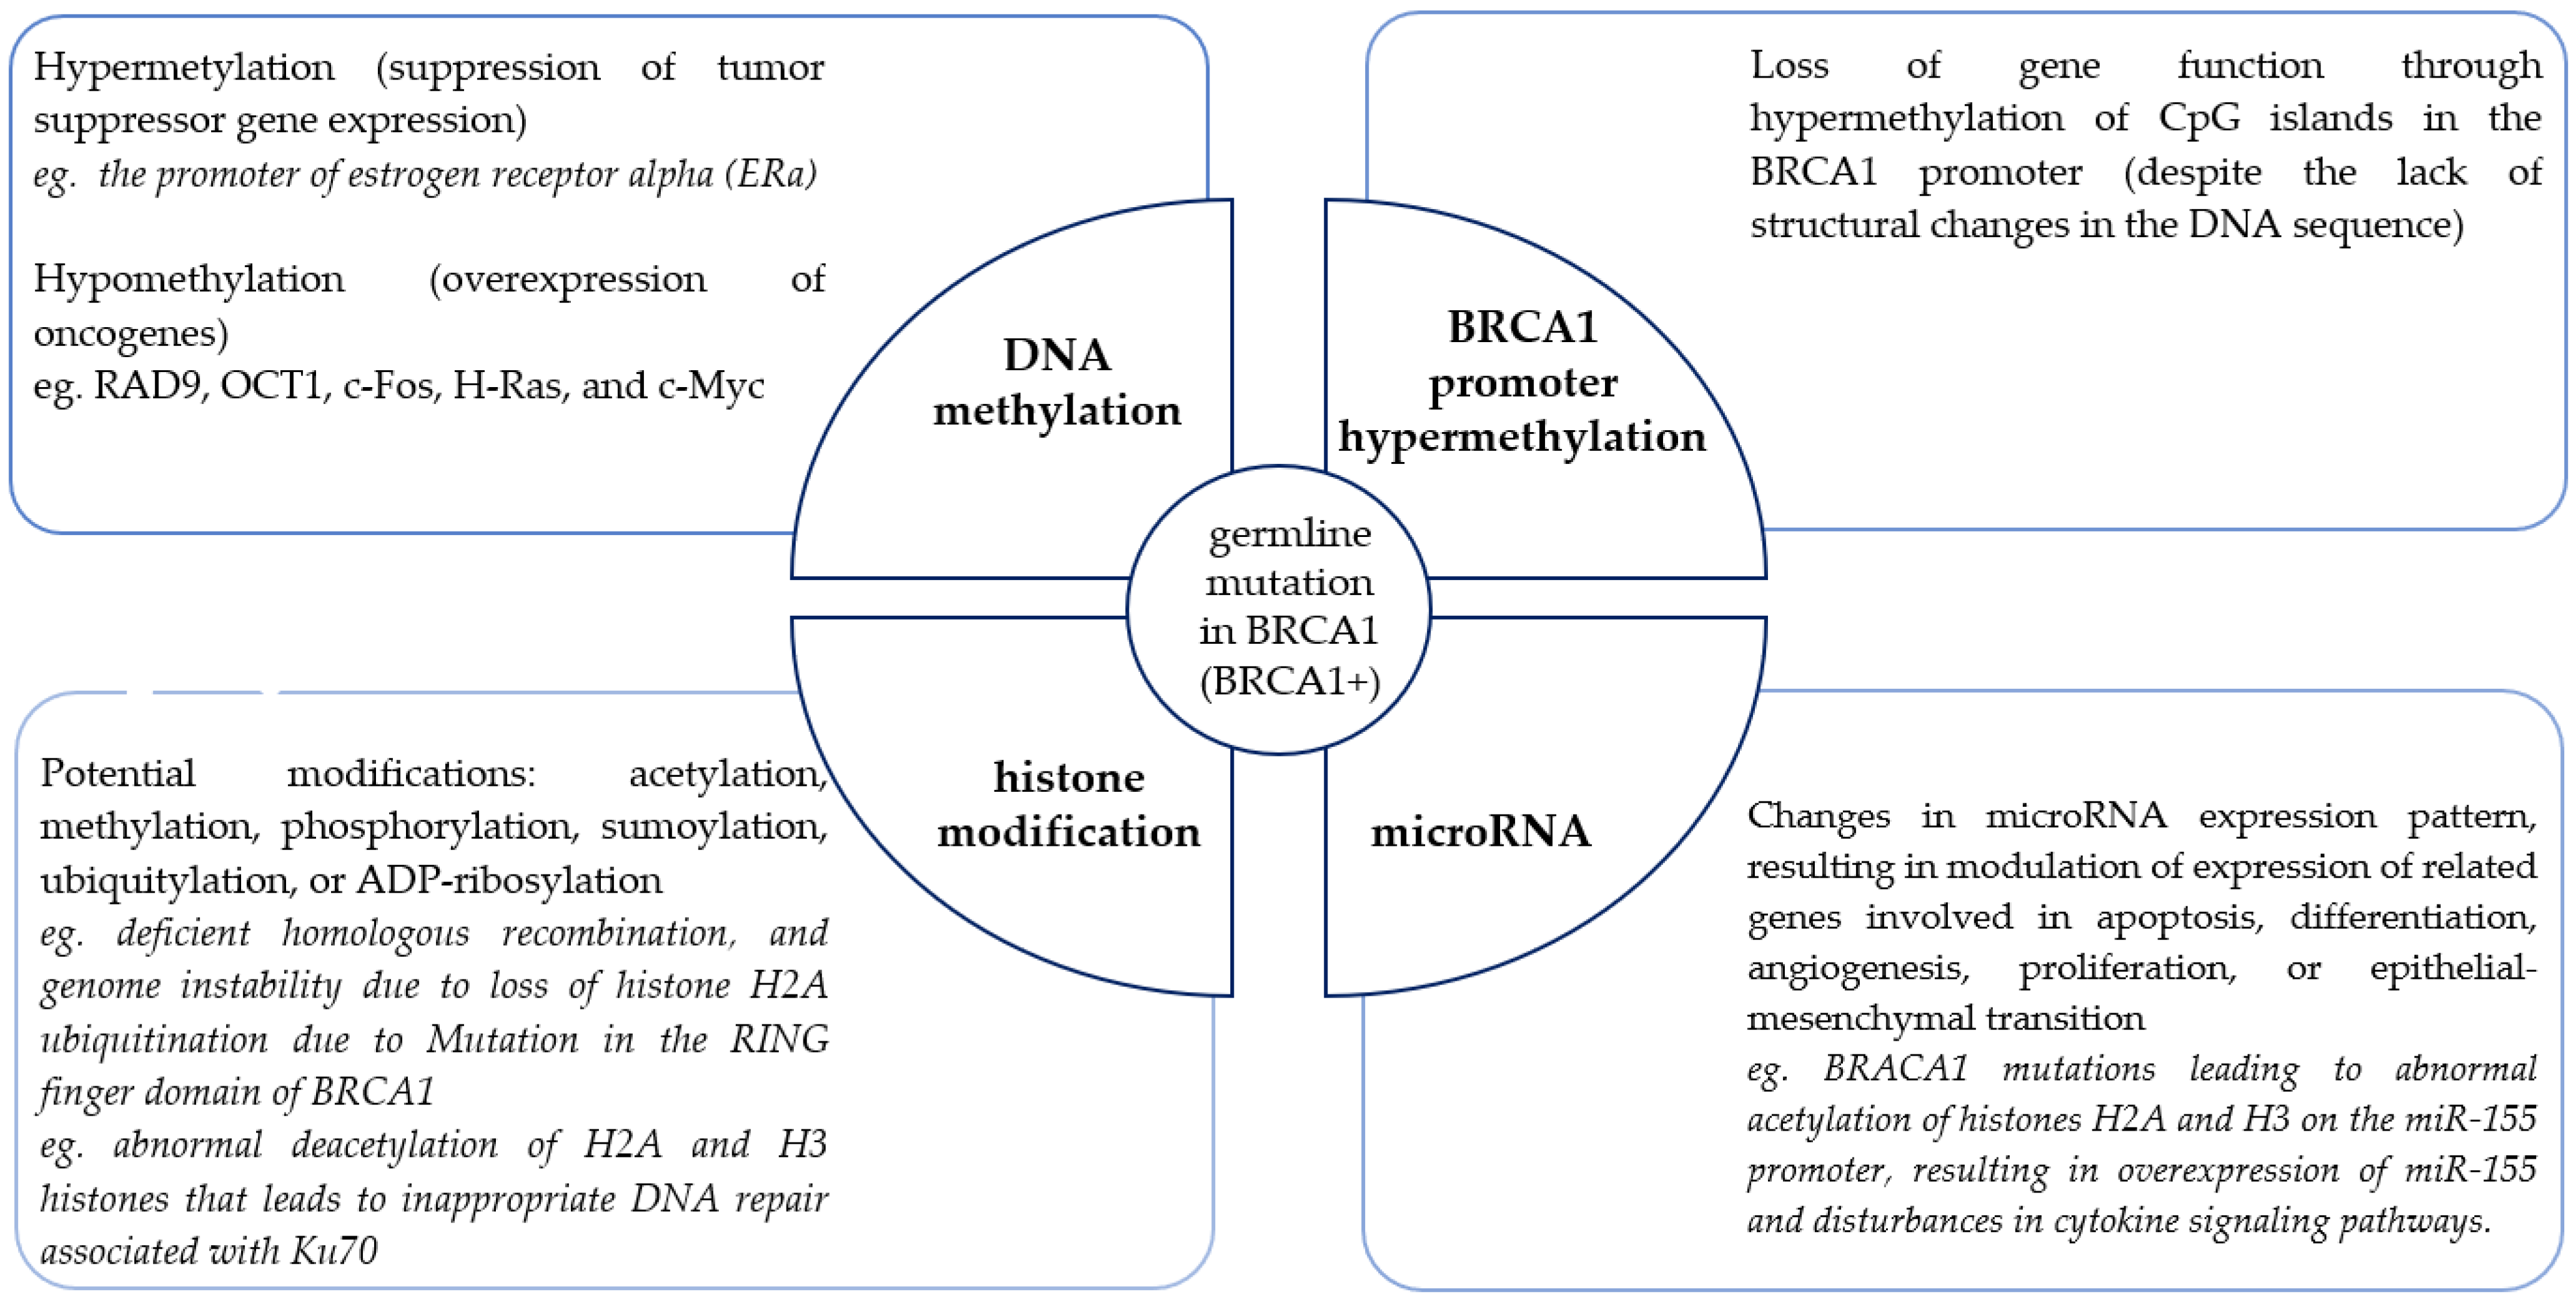 IJMS | Free Full-Text | Harnessing Epigenetics for Breast Cancer Therapy:  The Role of DNA Methylation, Histone Modifications, and MicroRNA